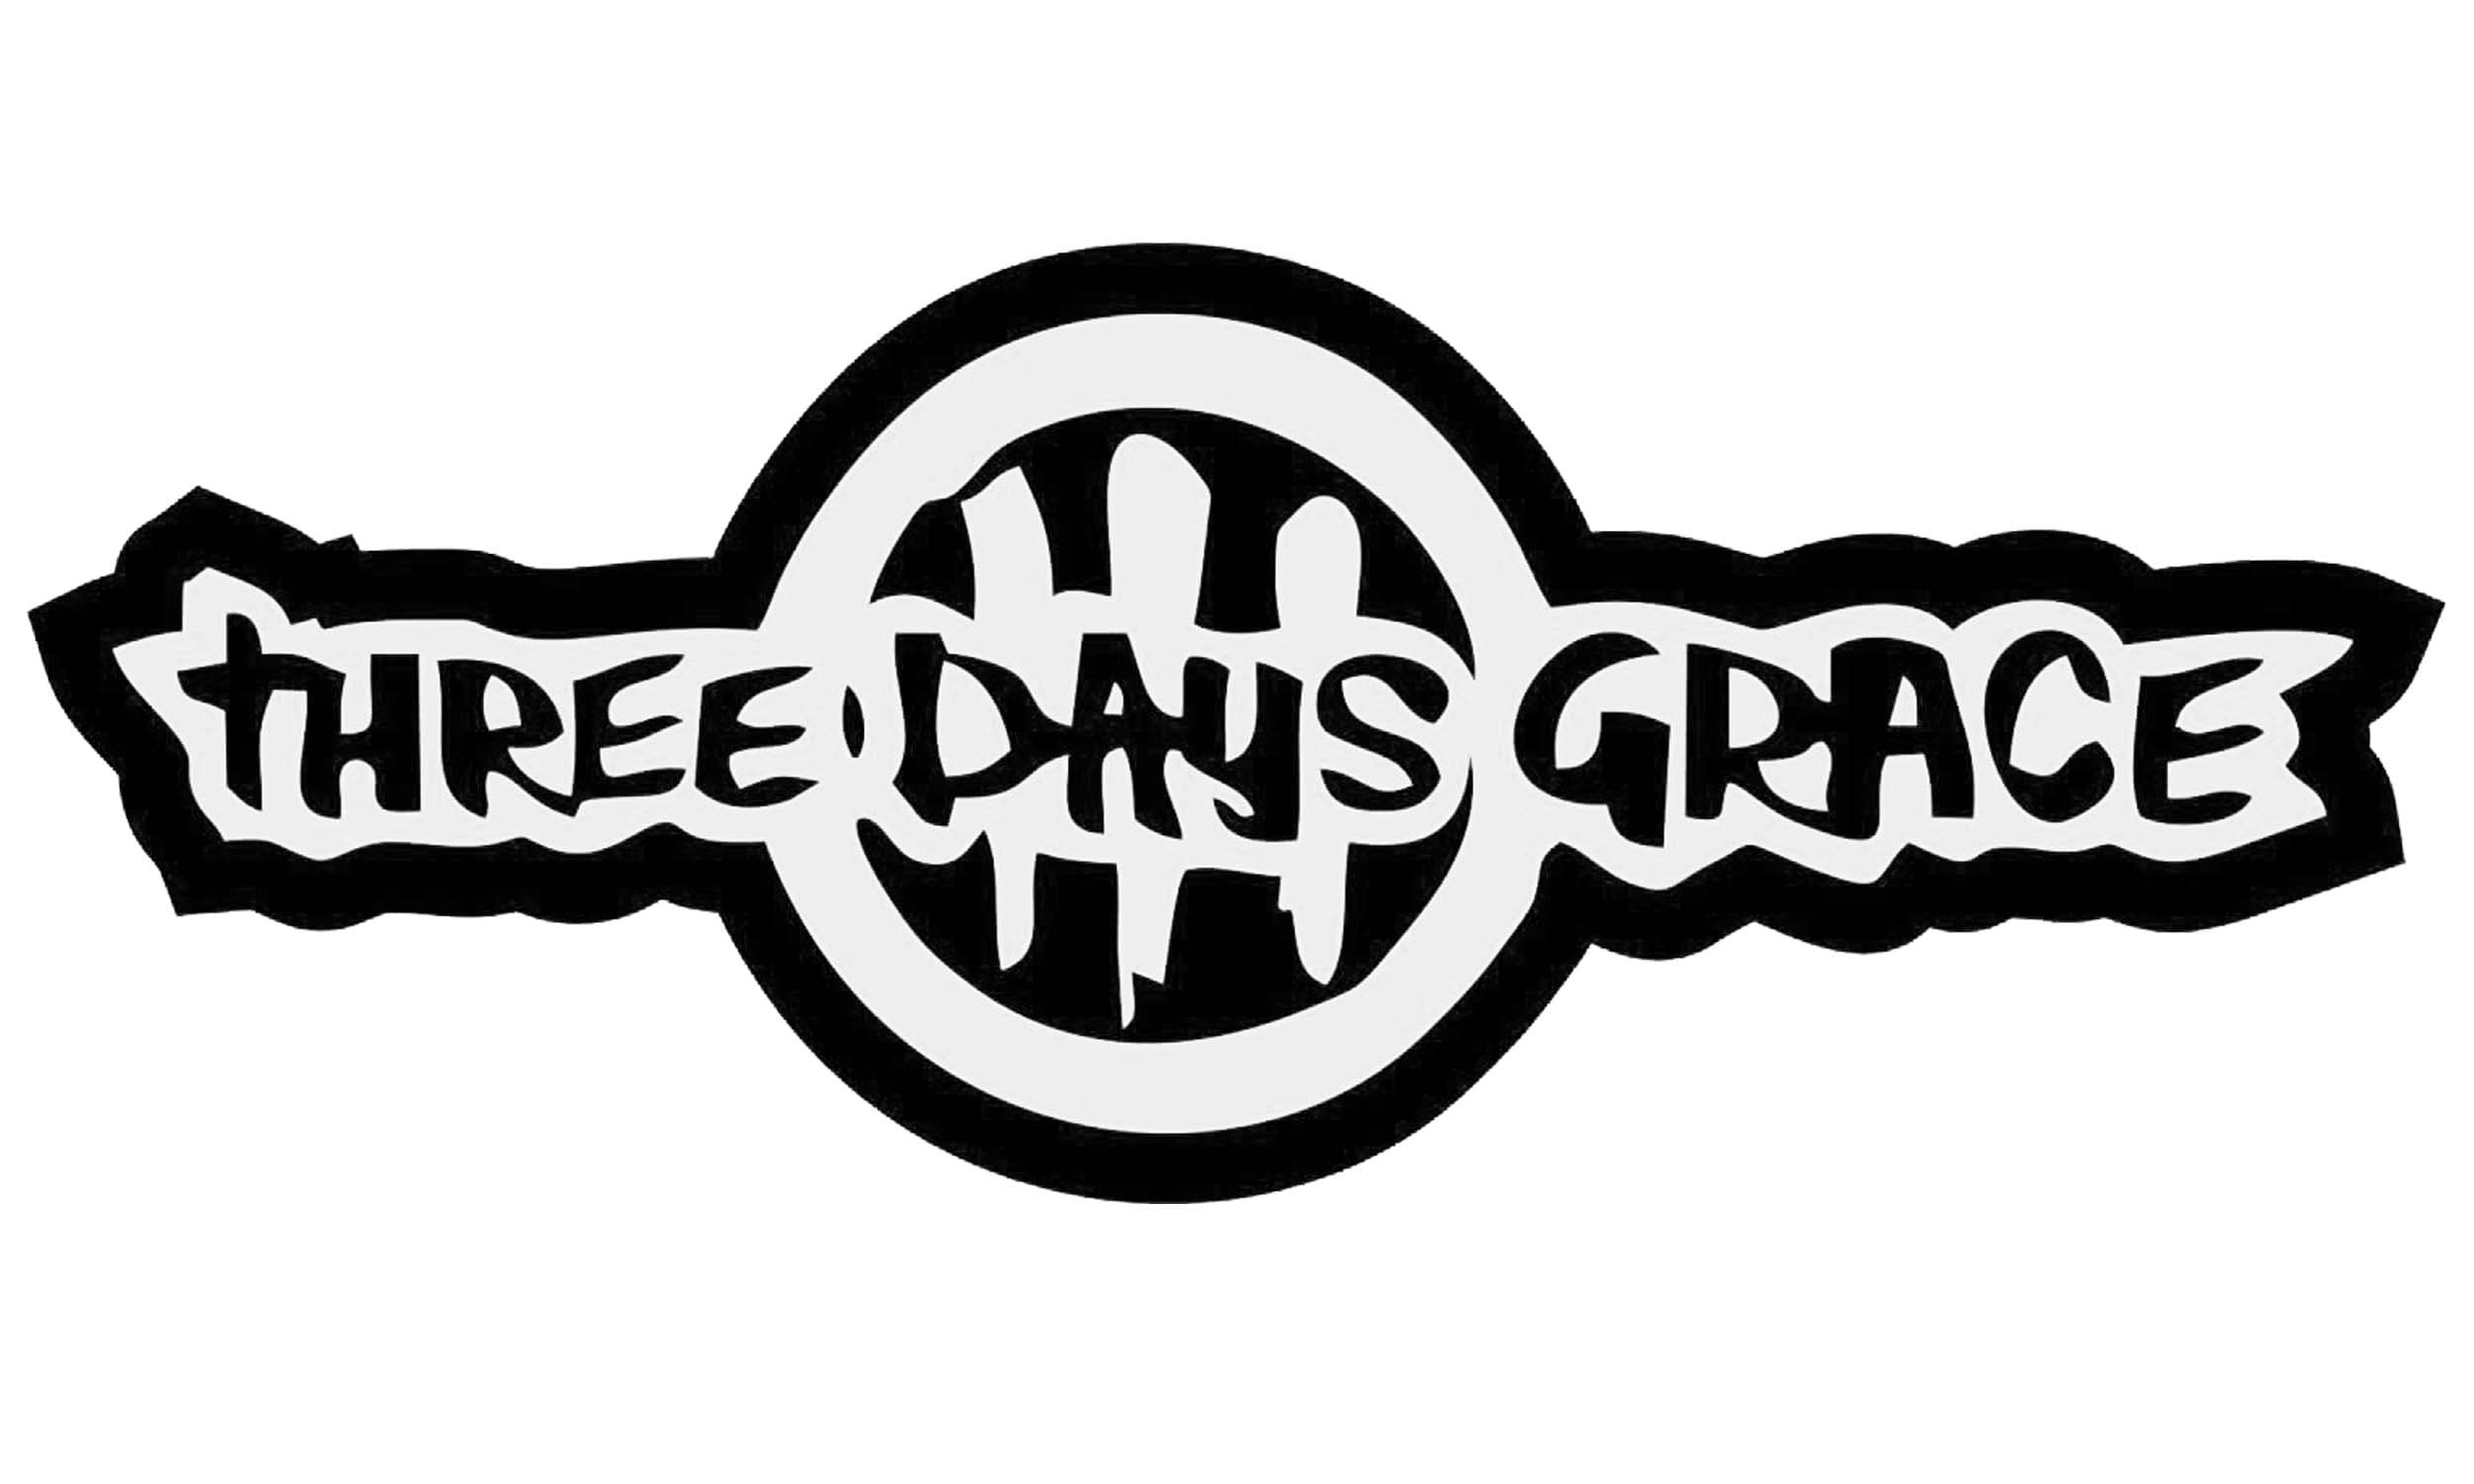 Three Days Grace: Originally formed as a high school band in Norwood, Logotype. 2500x1500 HD Wallpaper.